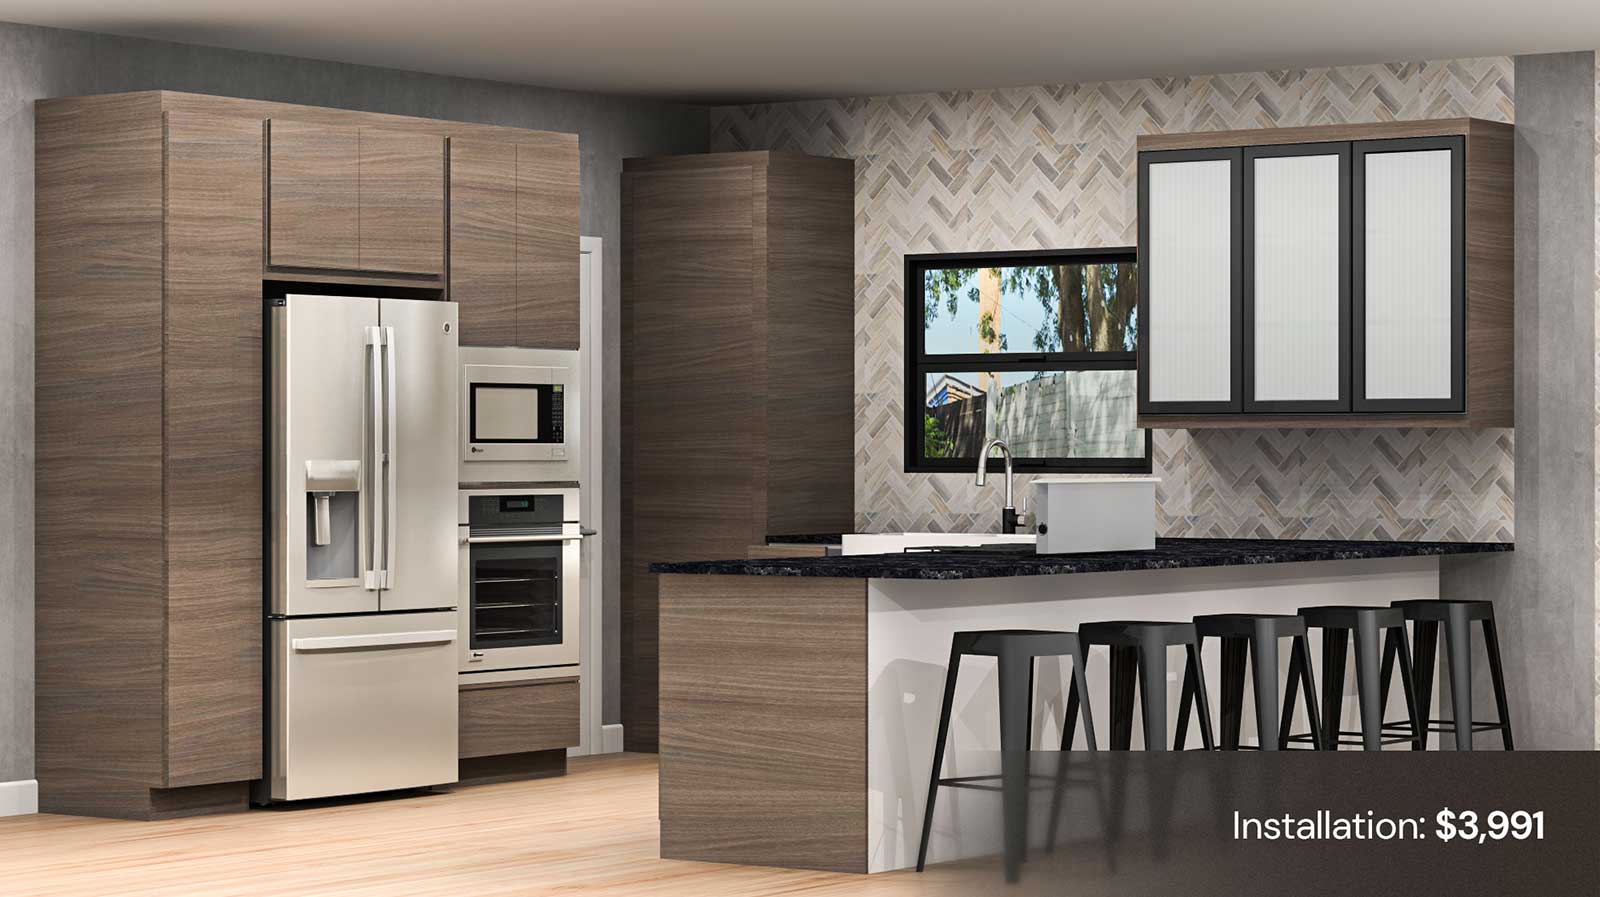 Rendering of kitchen with walnut colored cabinets